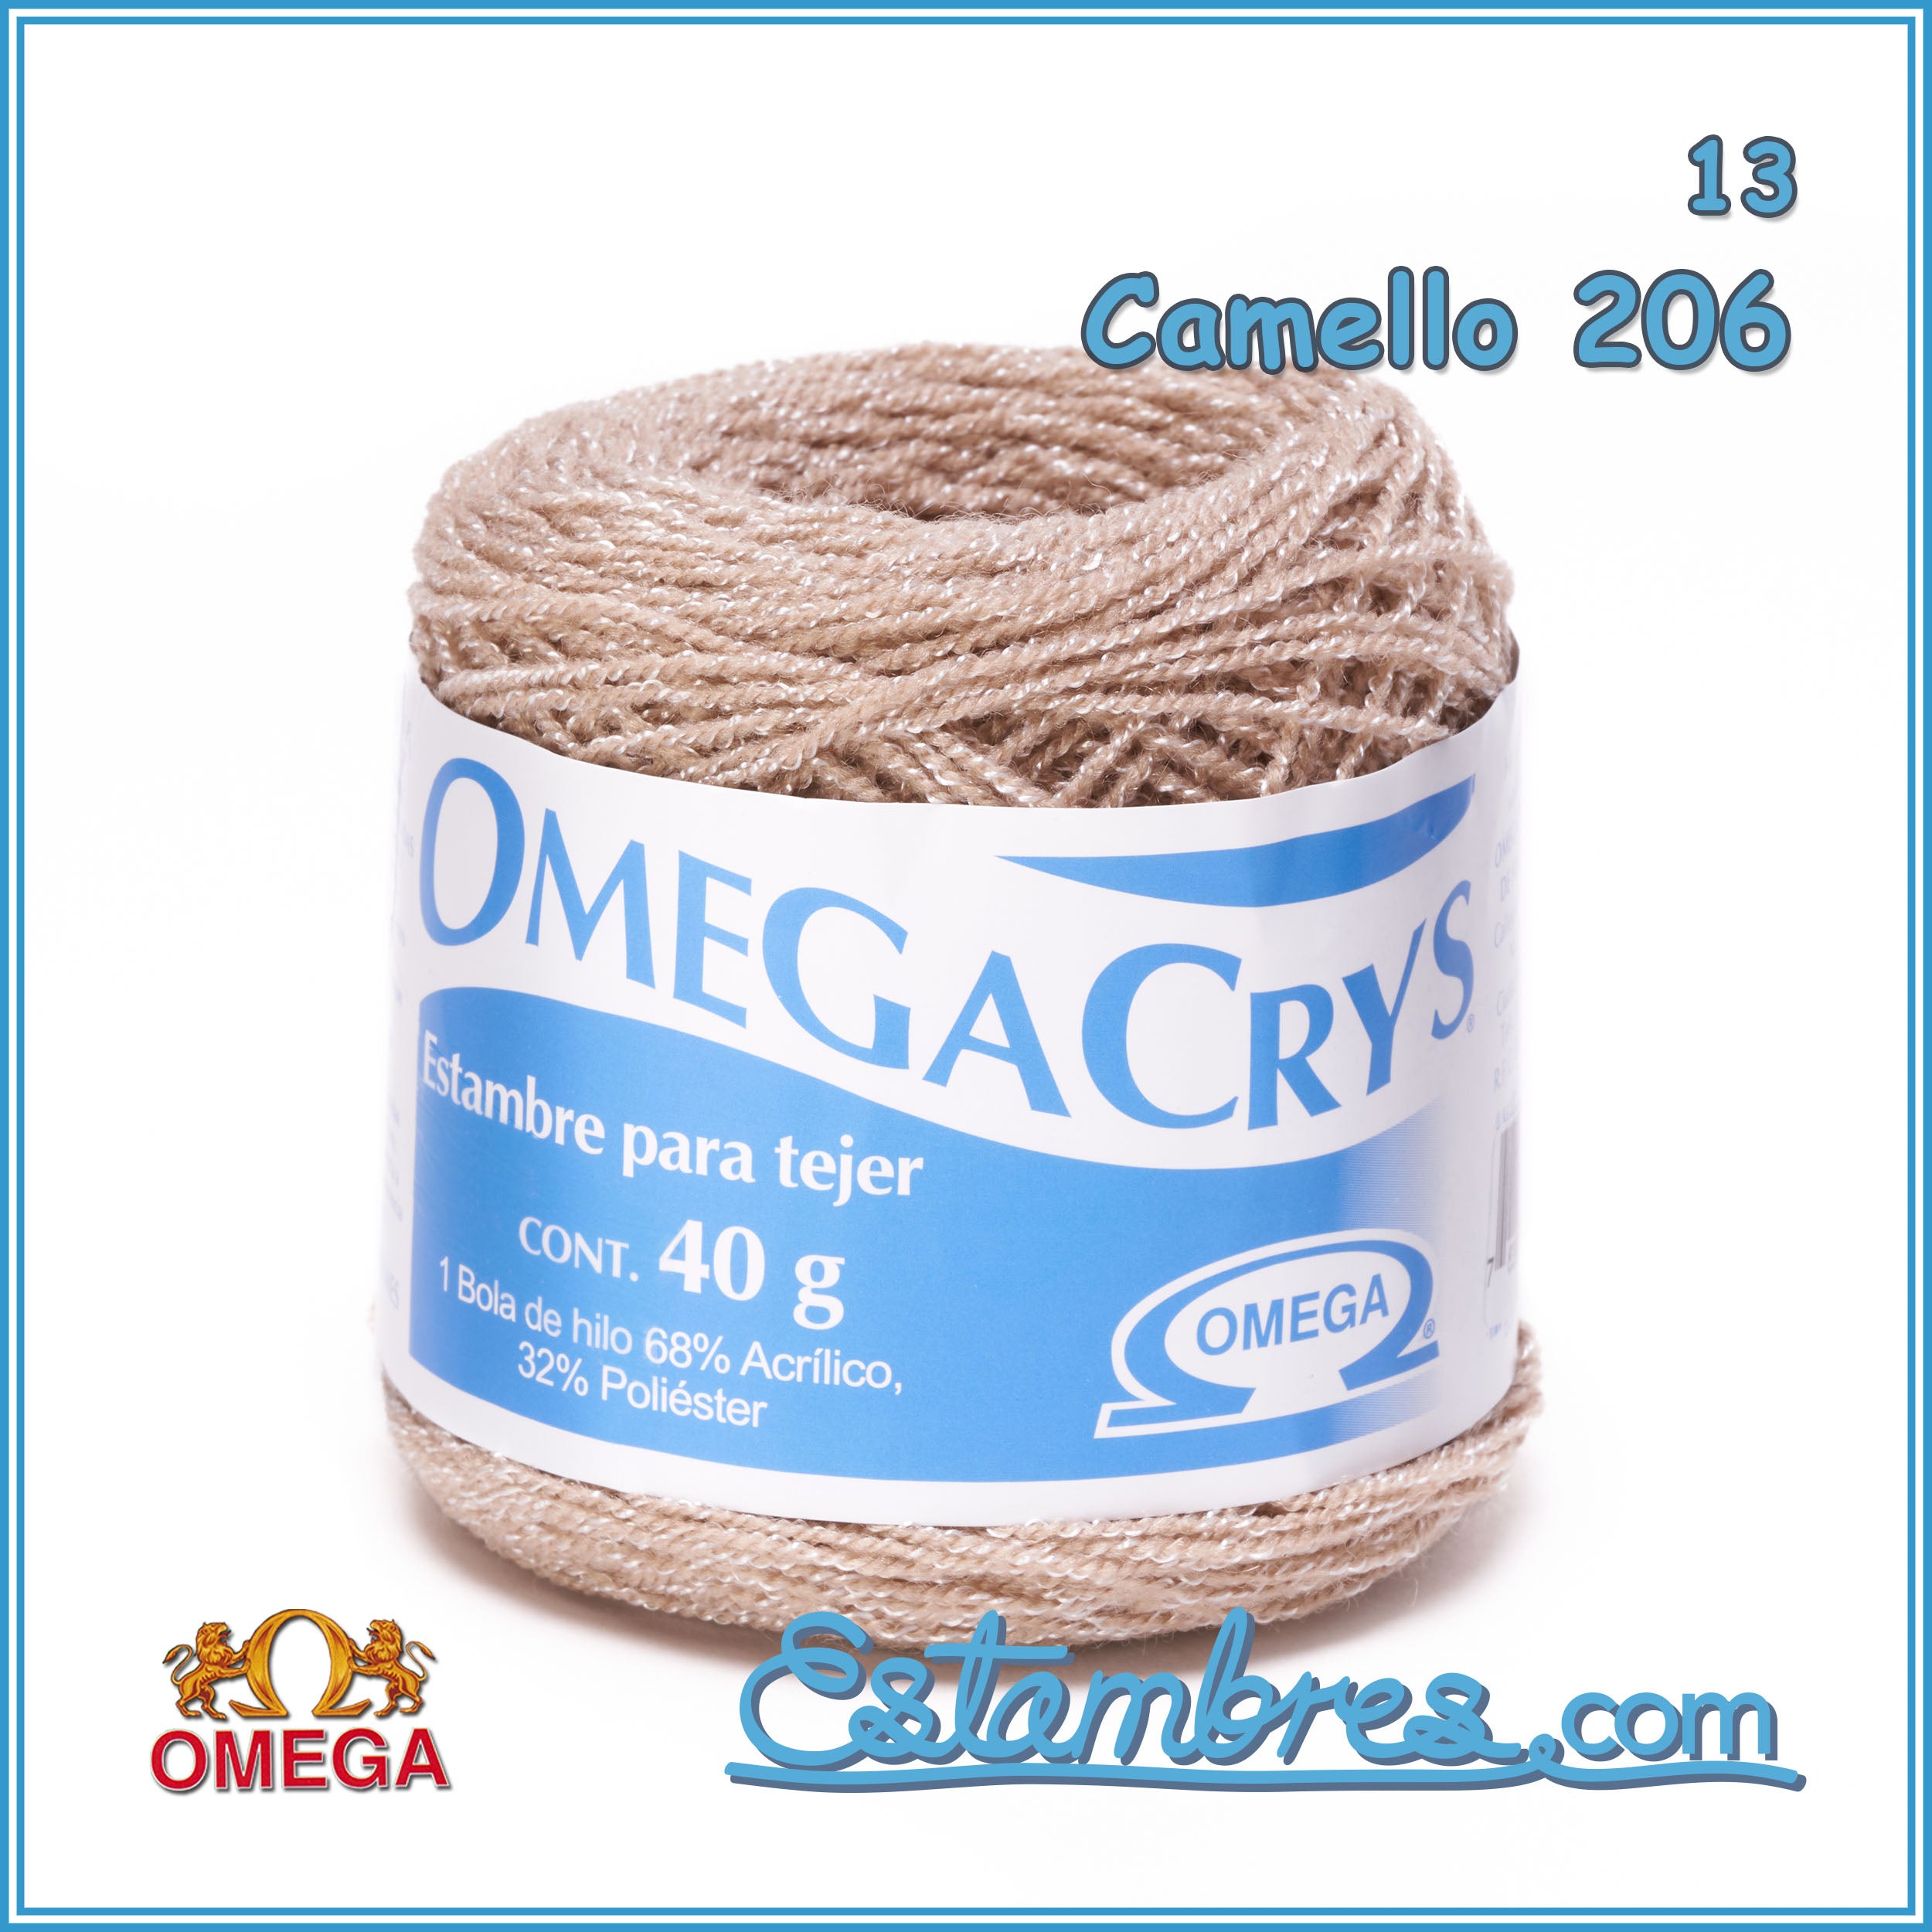 OMEGACRYS [40grs] - 1 of 2